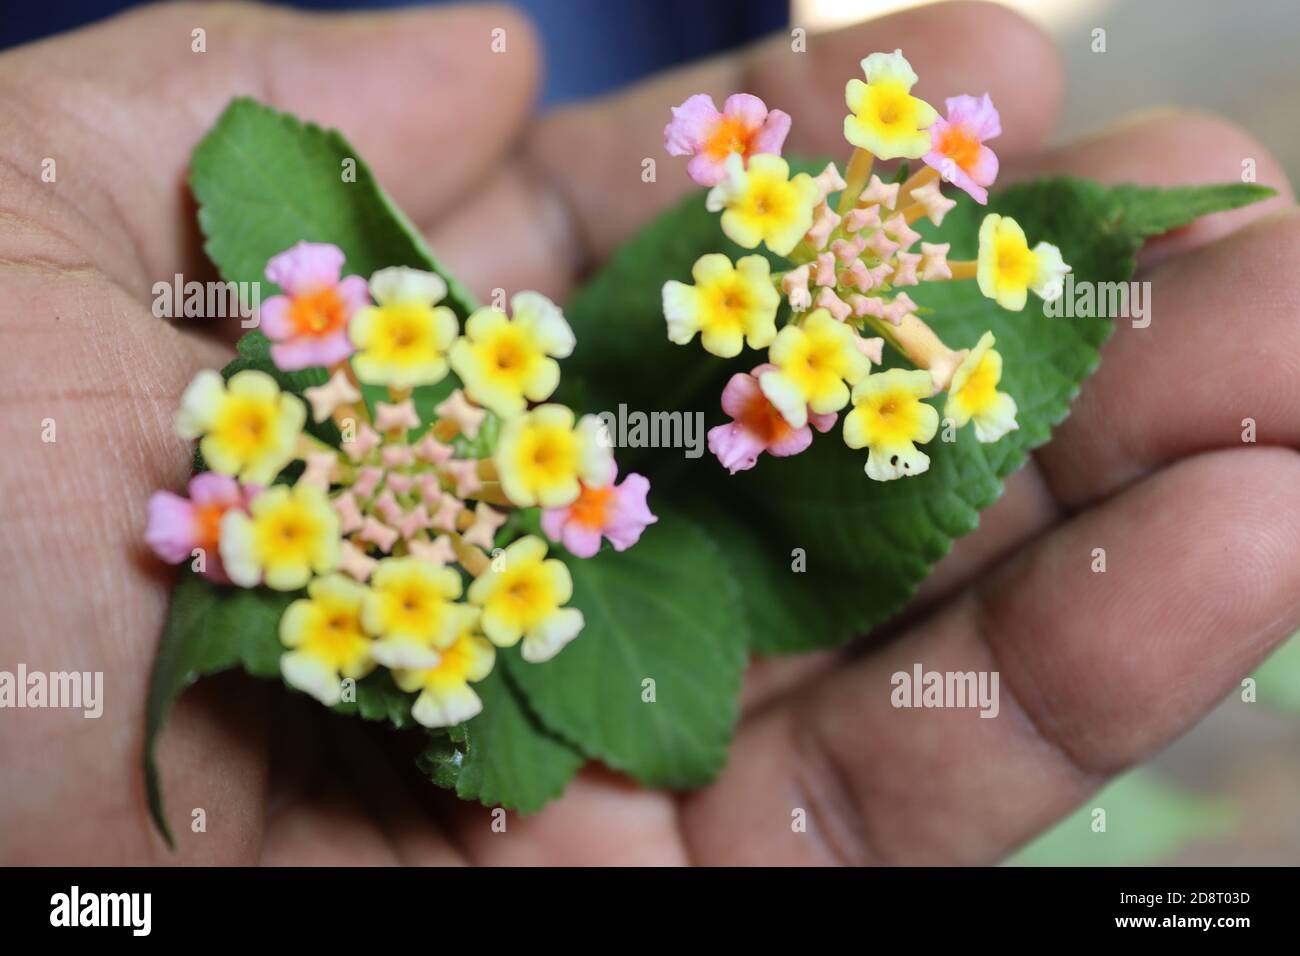 These small flowers commonly grow in the forest but cannot see any special. But through the camera lens can understand nature hide something from us. Stock Photo